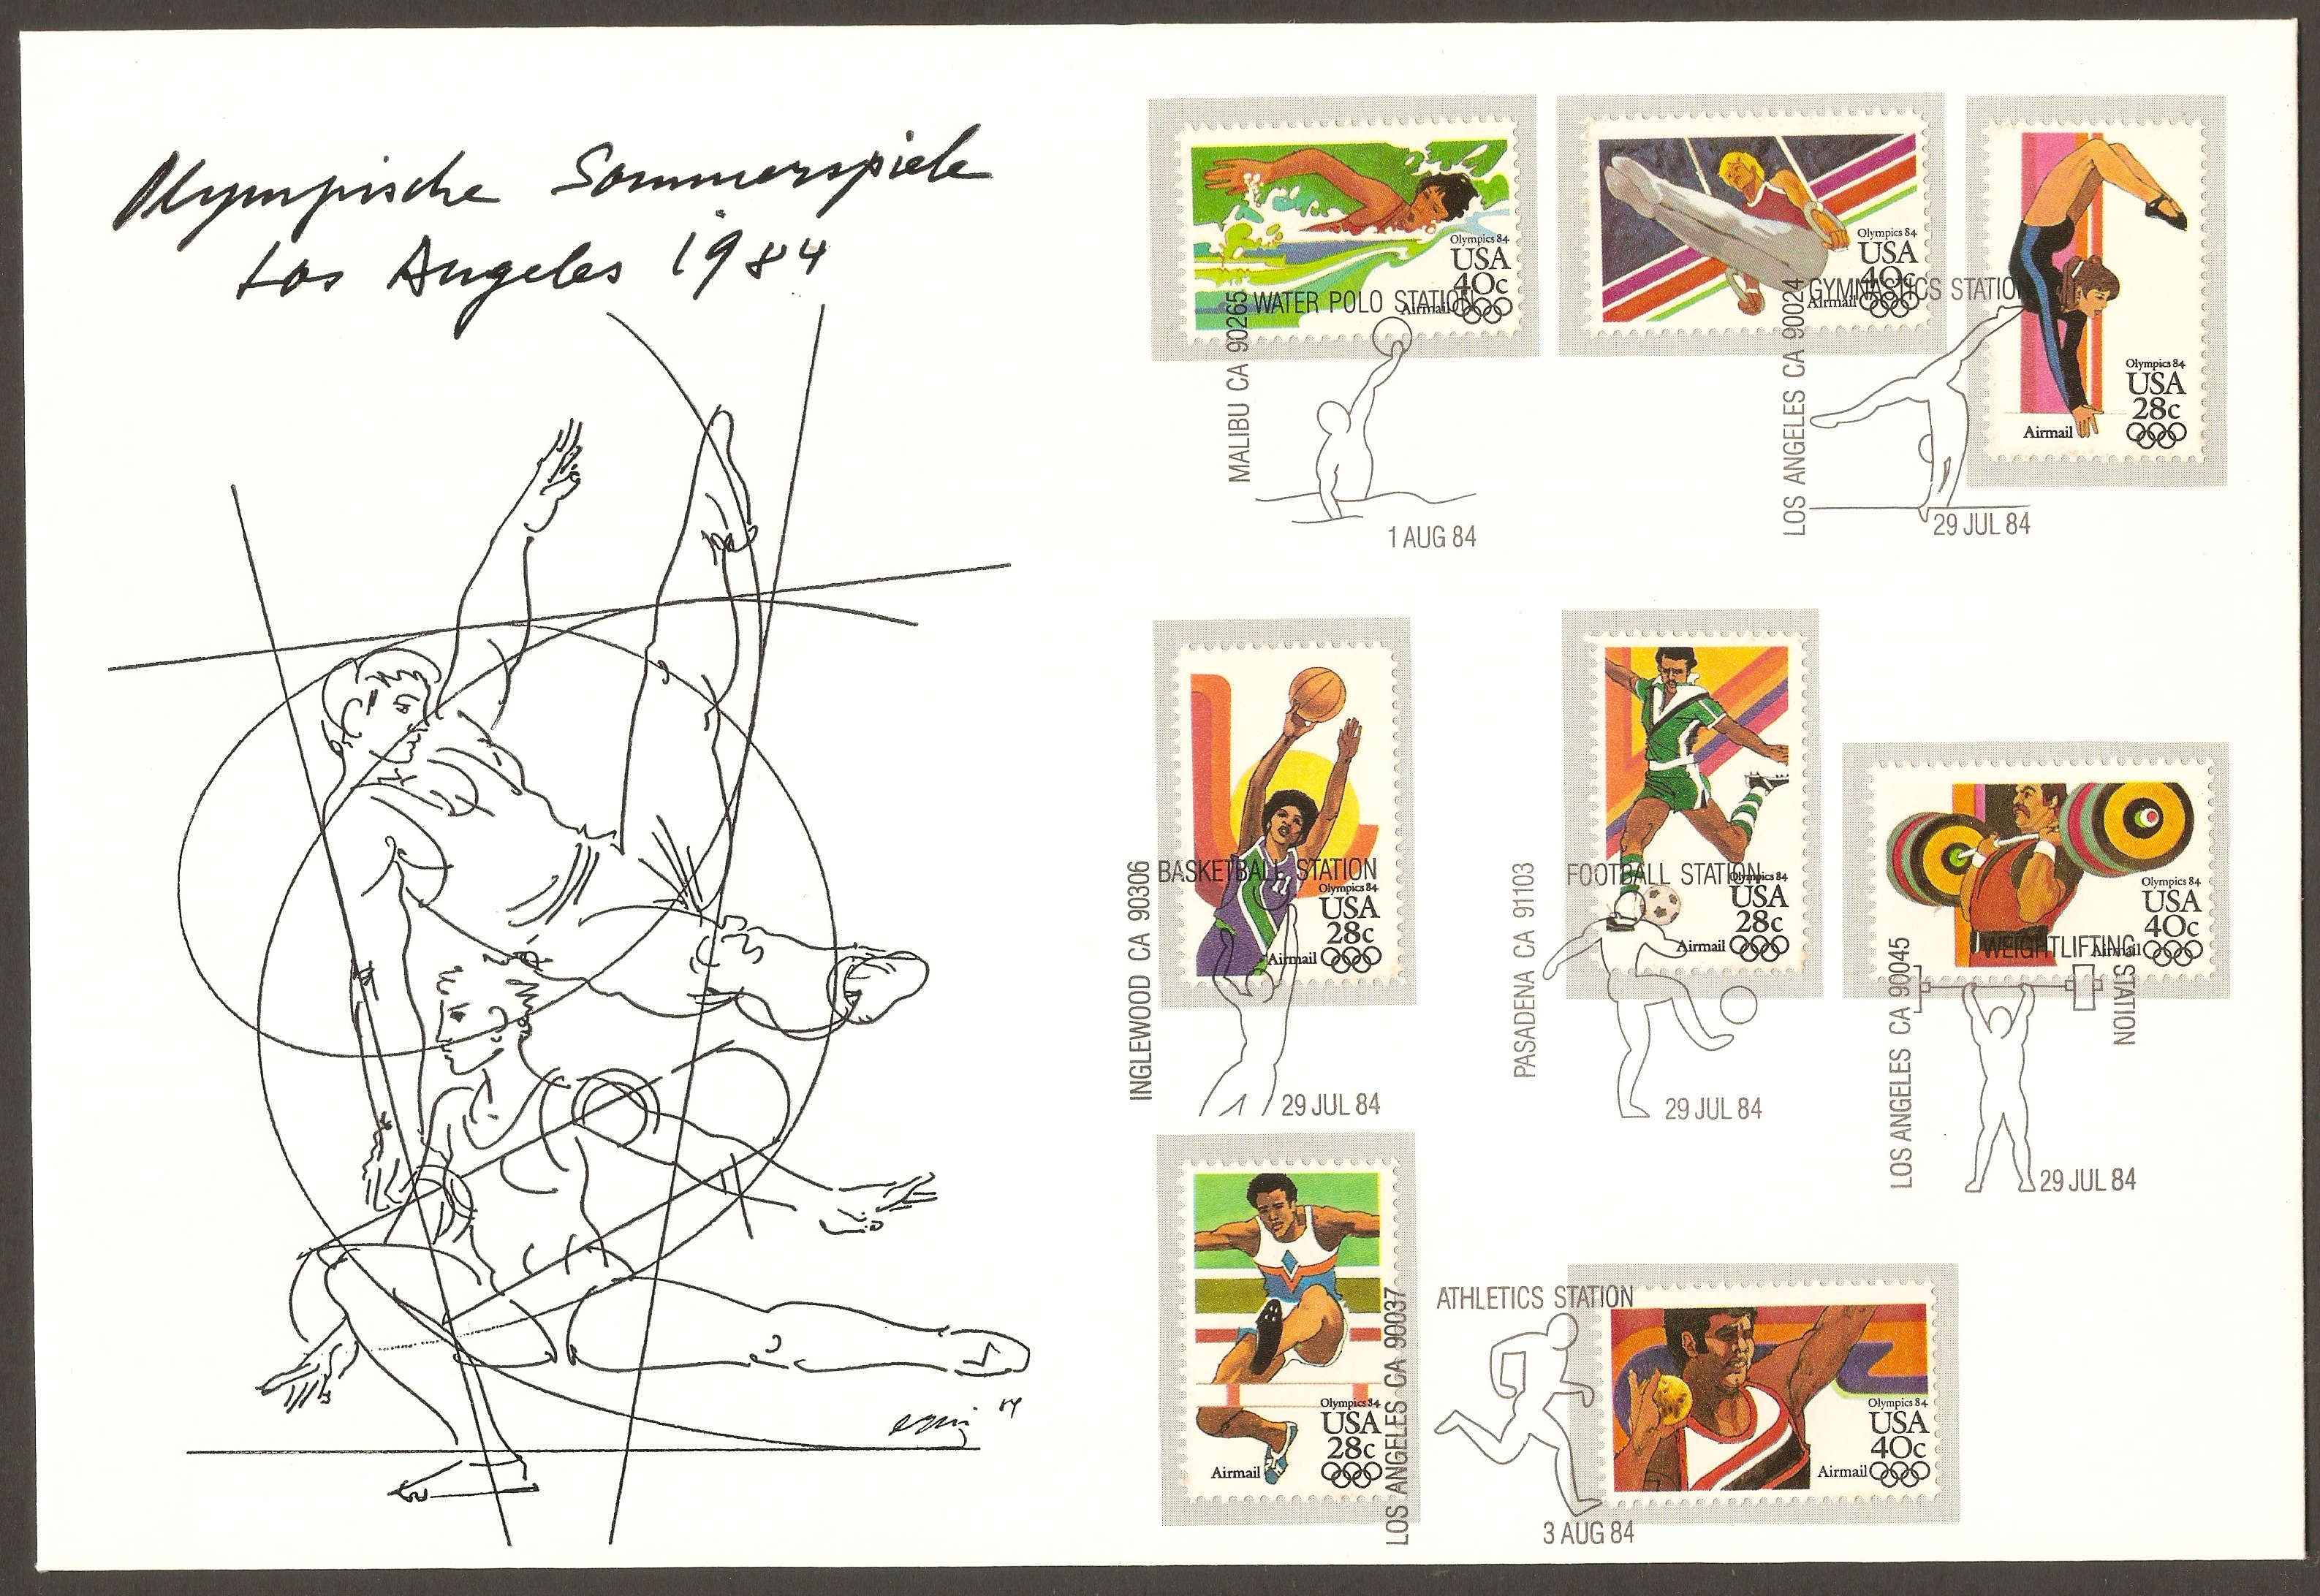 United States 1983 Los Angeles Olympics Souvenir Cover.